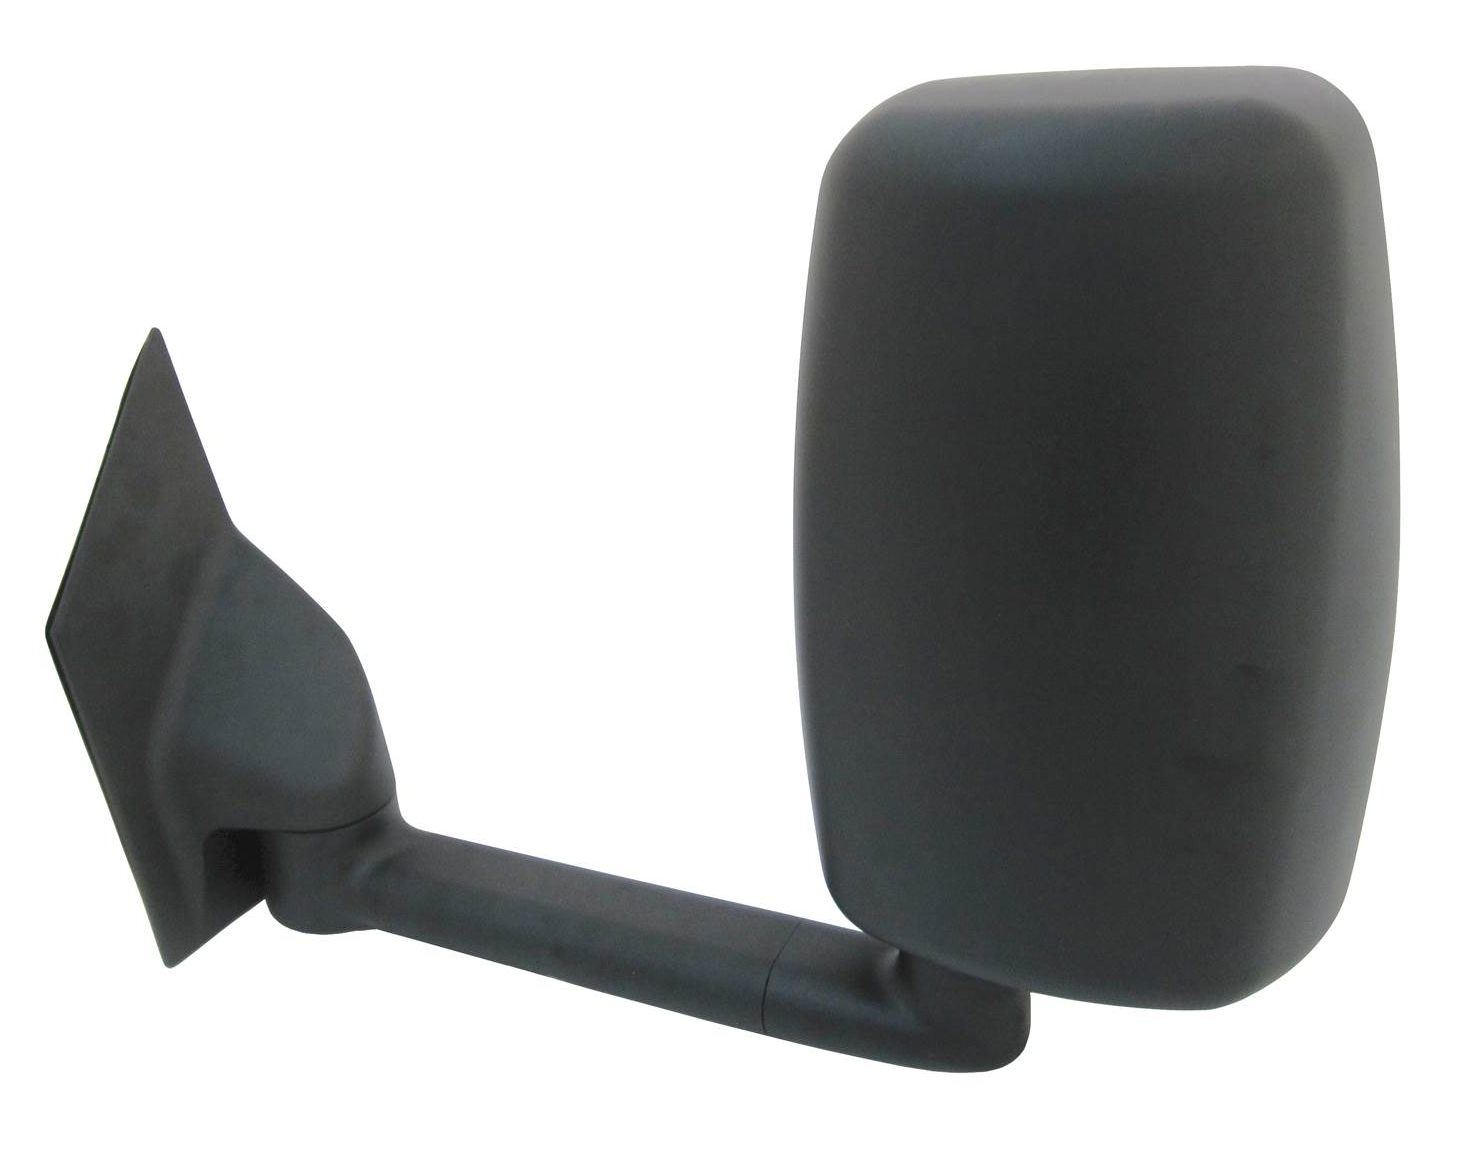 Aftermarket MIRRORS for CHEVROLET - EXPRESS 2500, EXPRESS 2500,03-11,LT Mirror outside rear view